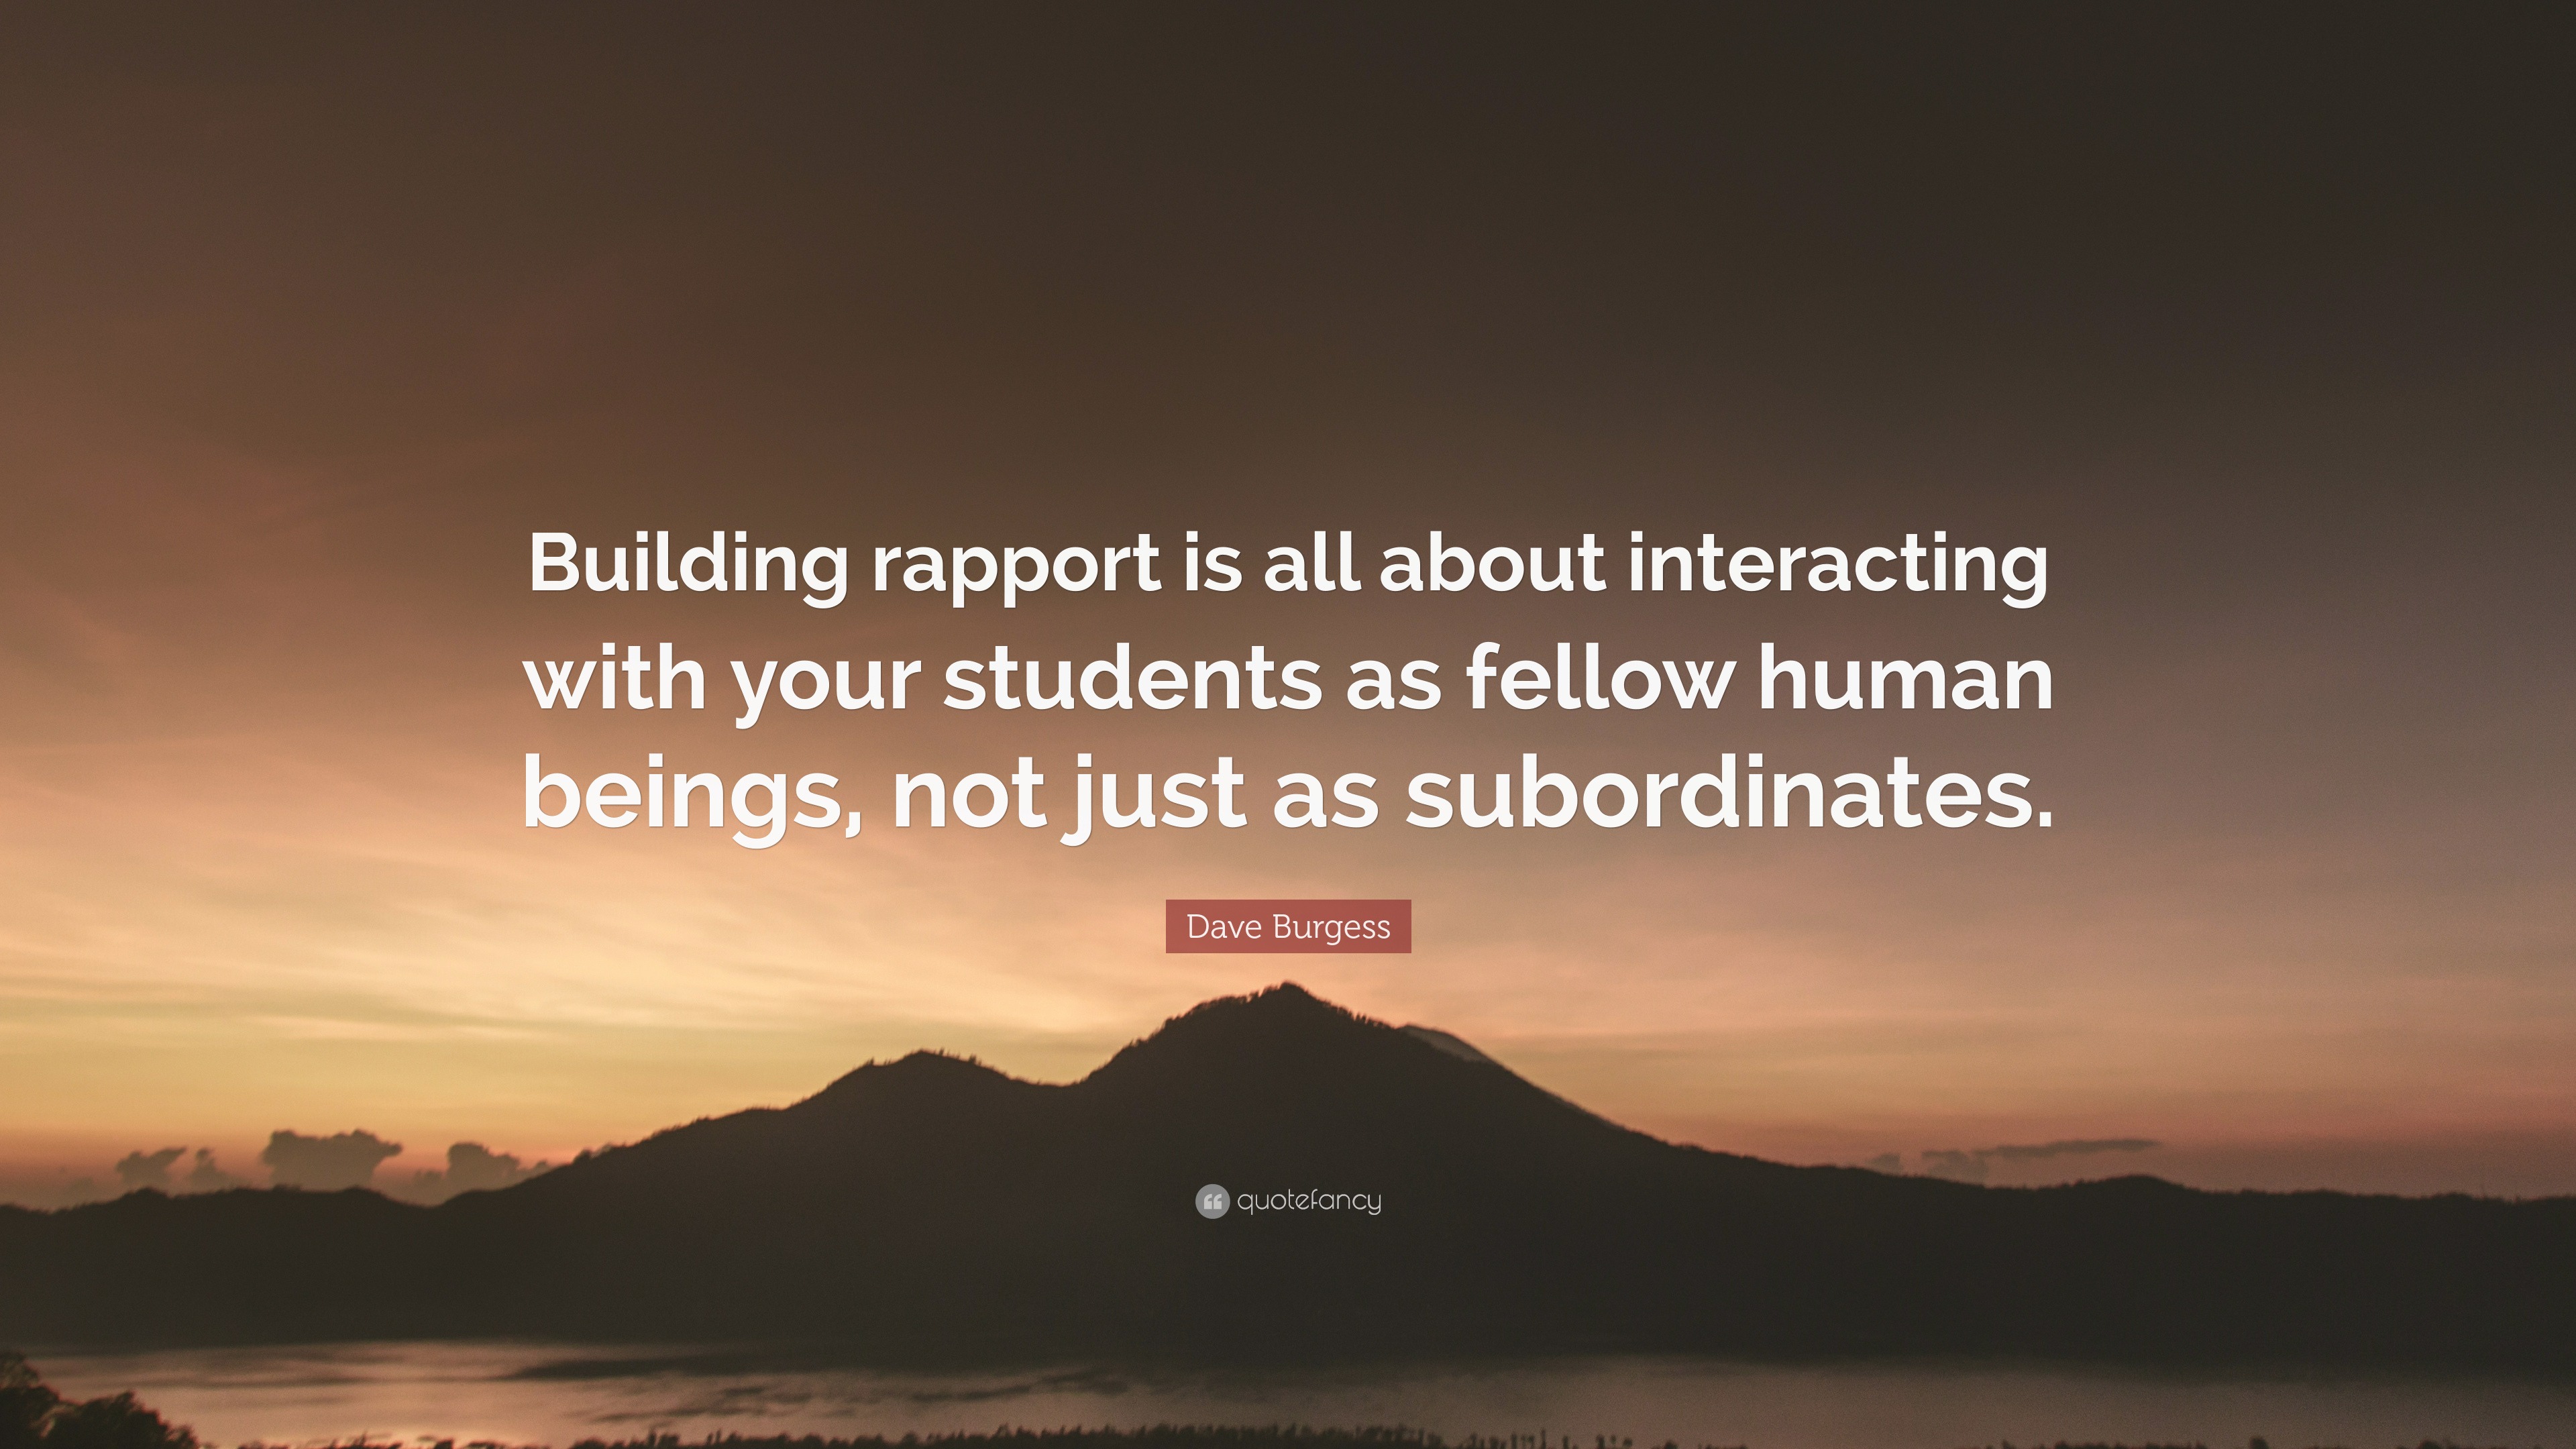 Dave Burgess Quote: “Building rapport is all about interacting with